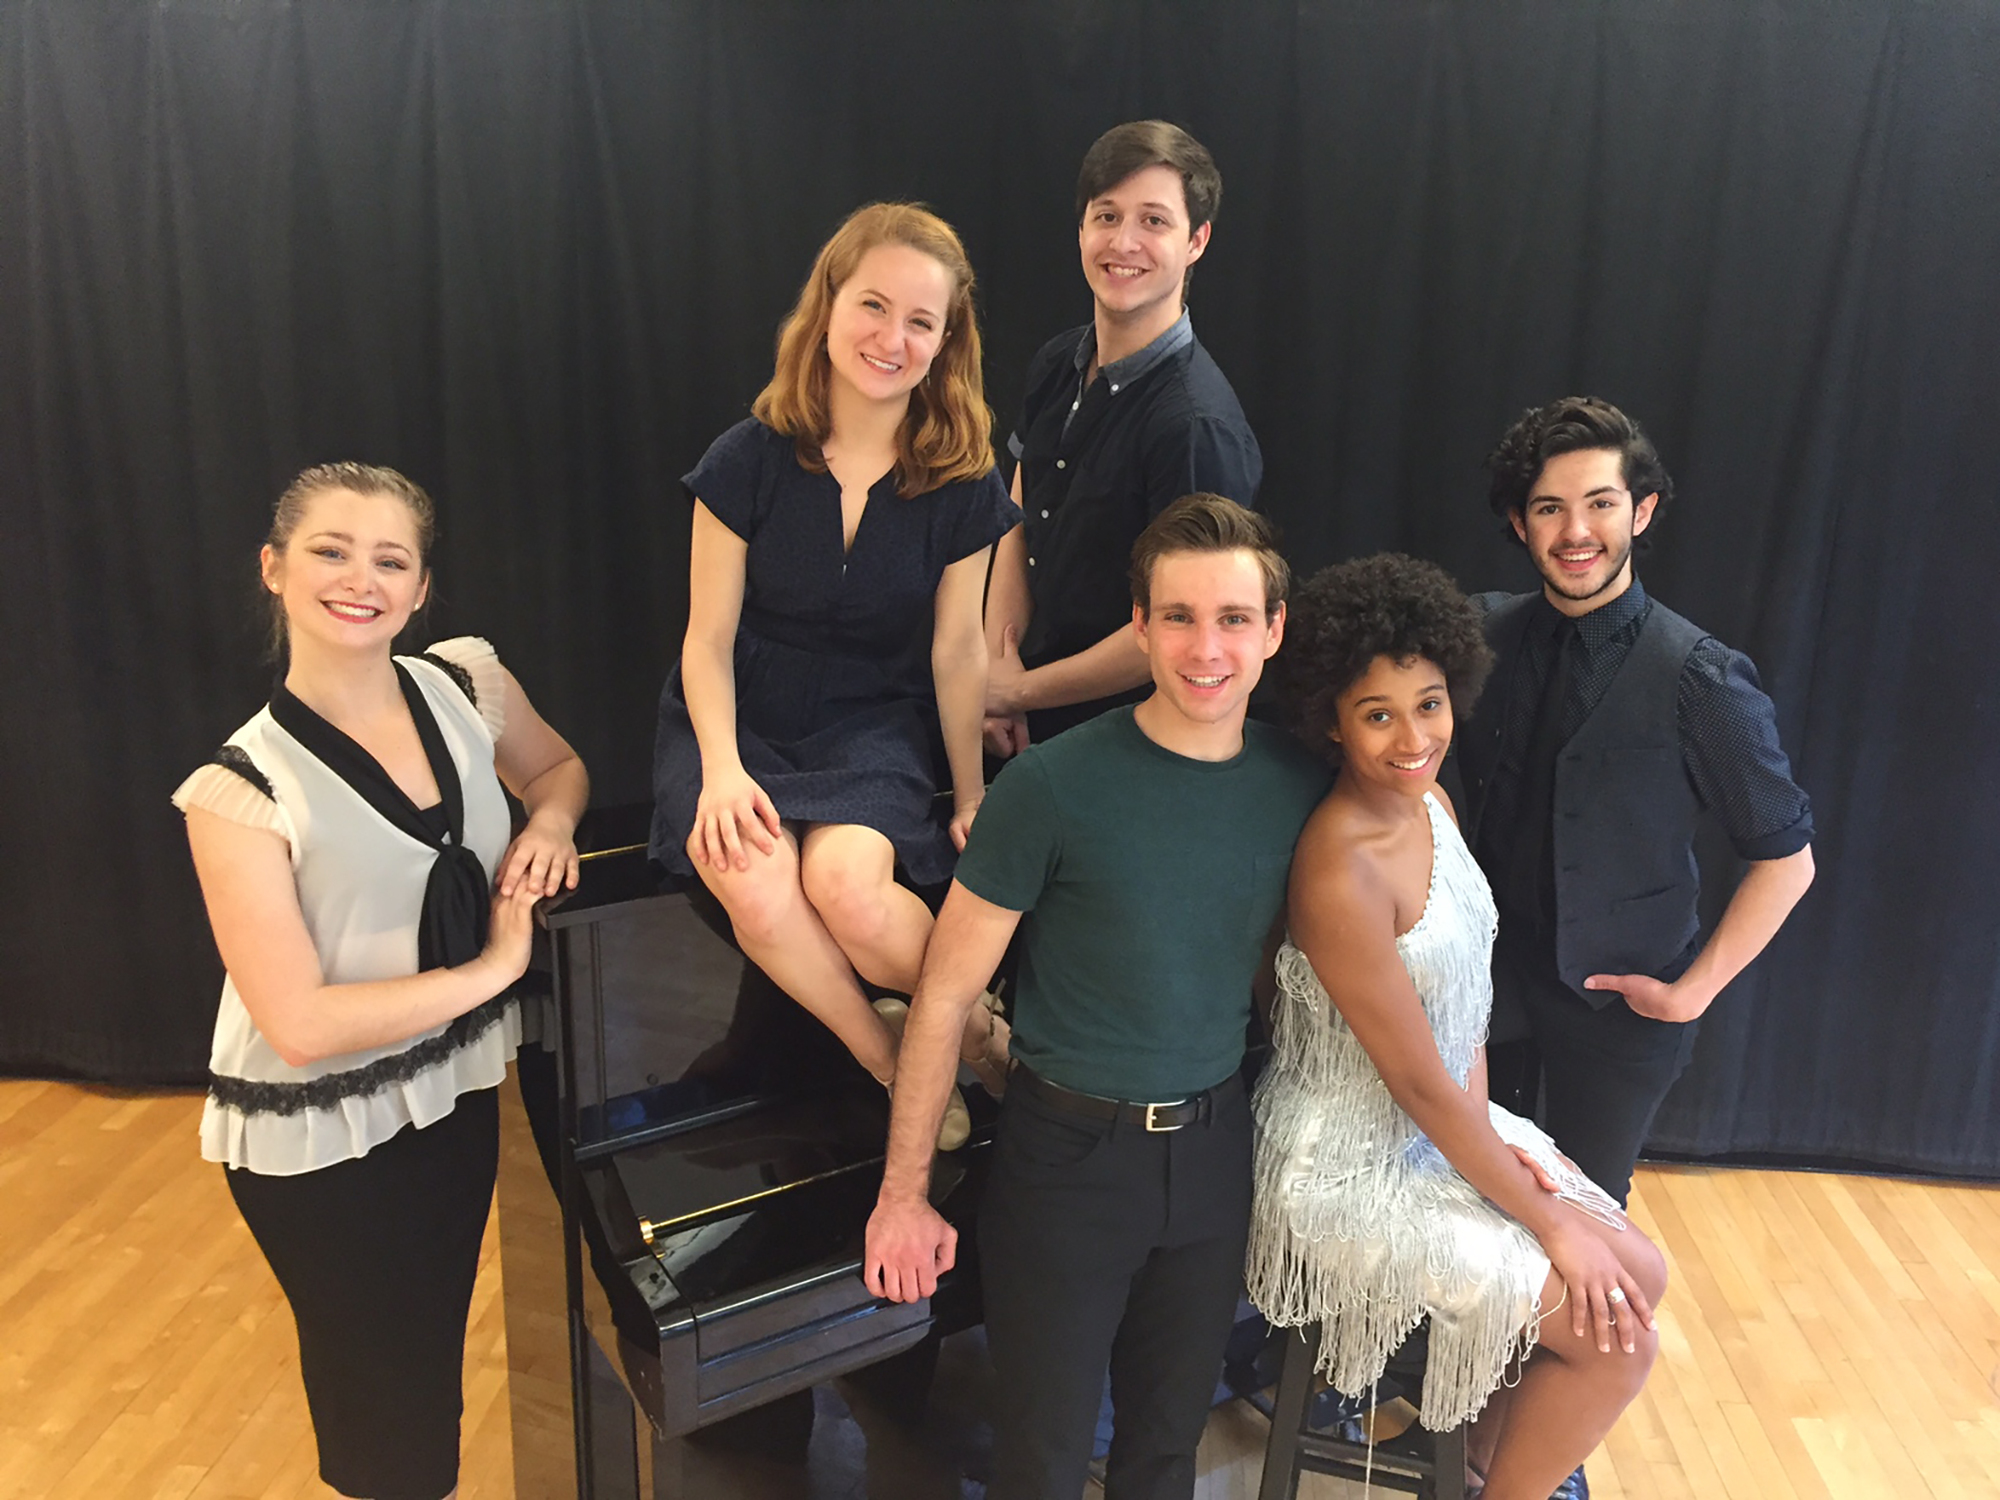 Penn State musical theater students Julia Hemp, Laura Guley, Johnathan Teeling, Joseph Allen, Maria Wirries and Daniel Teixeira will sing in Artist Series Concerts’ tribute to Cole Porter. Courtesy.